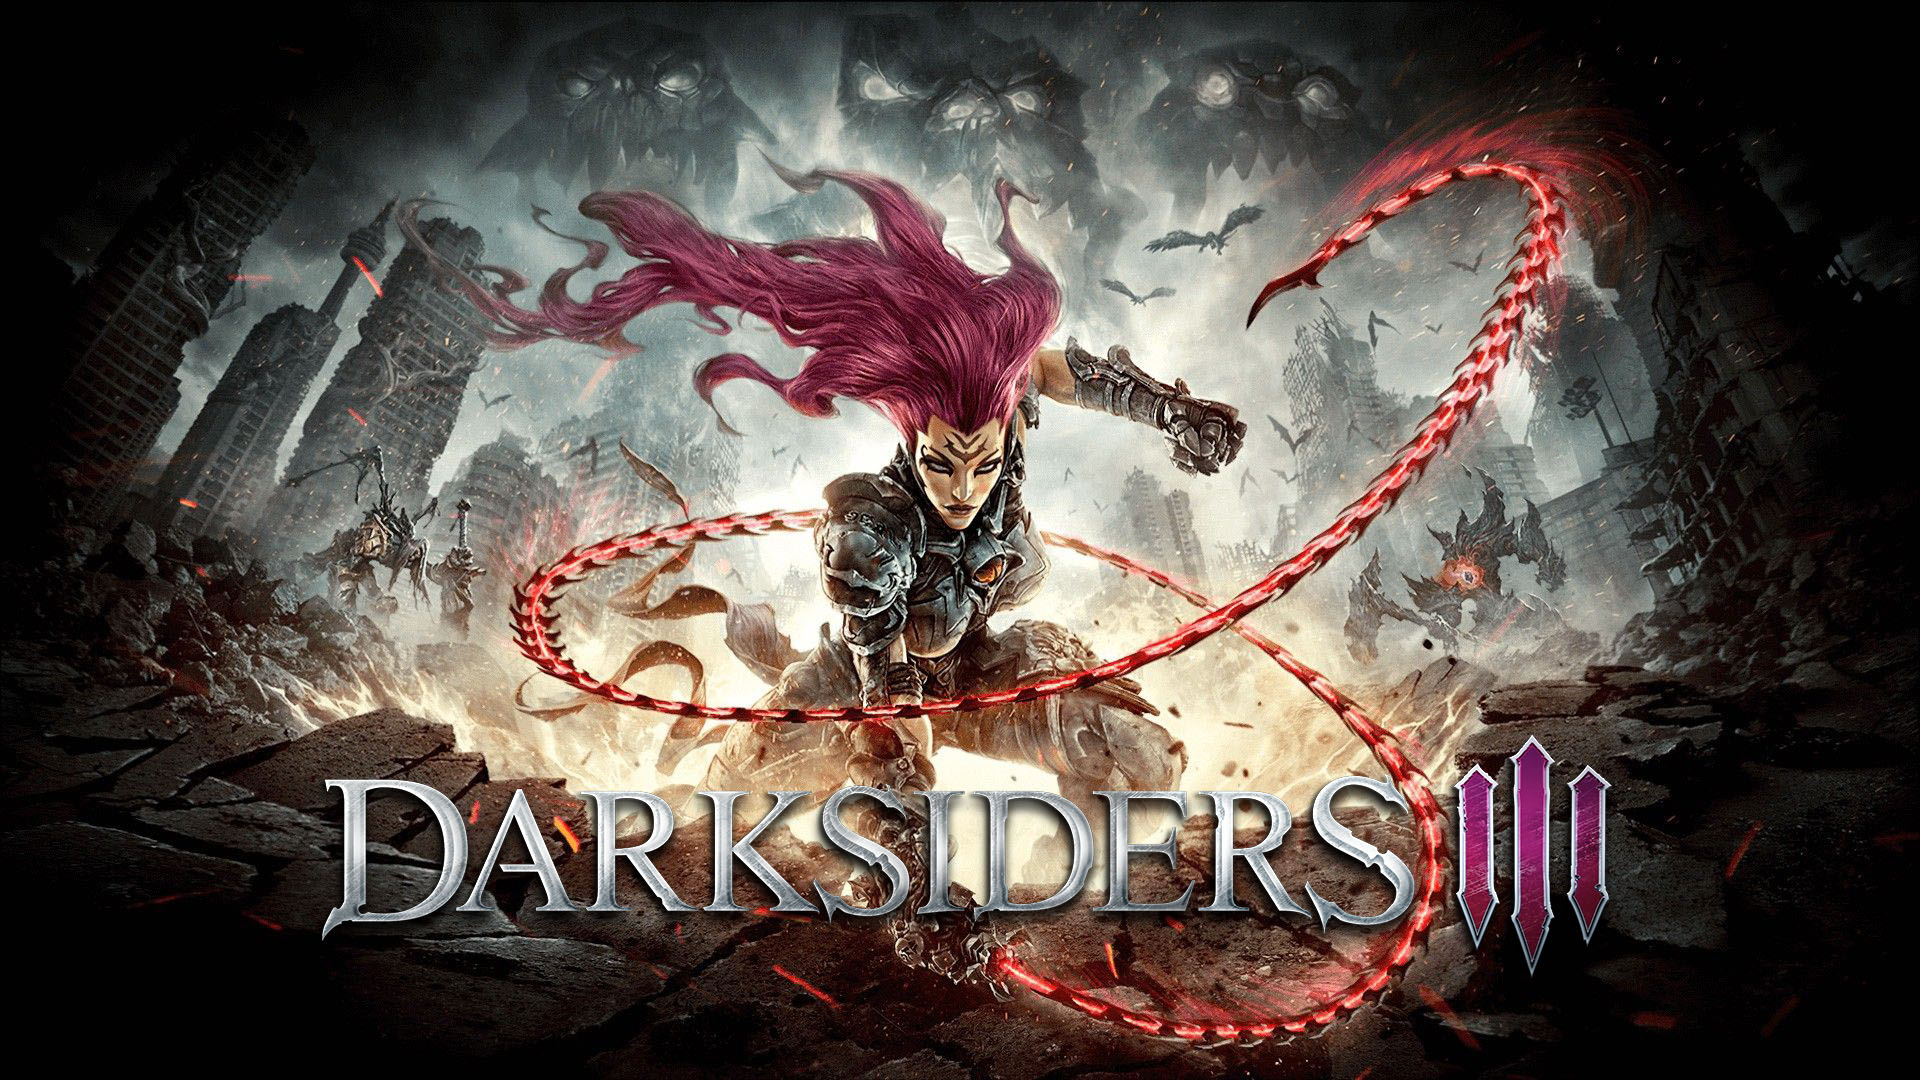 Darksiders III Is Coming To Nintendo Switch On September 30th